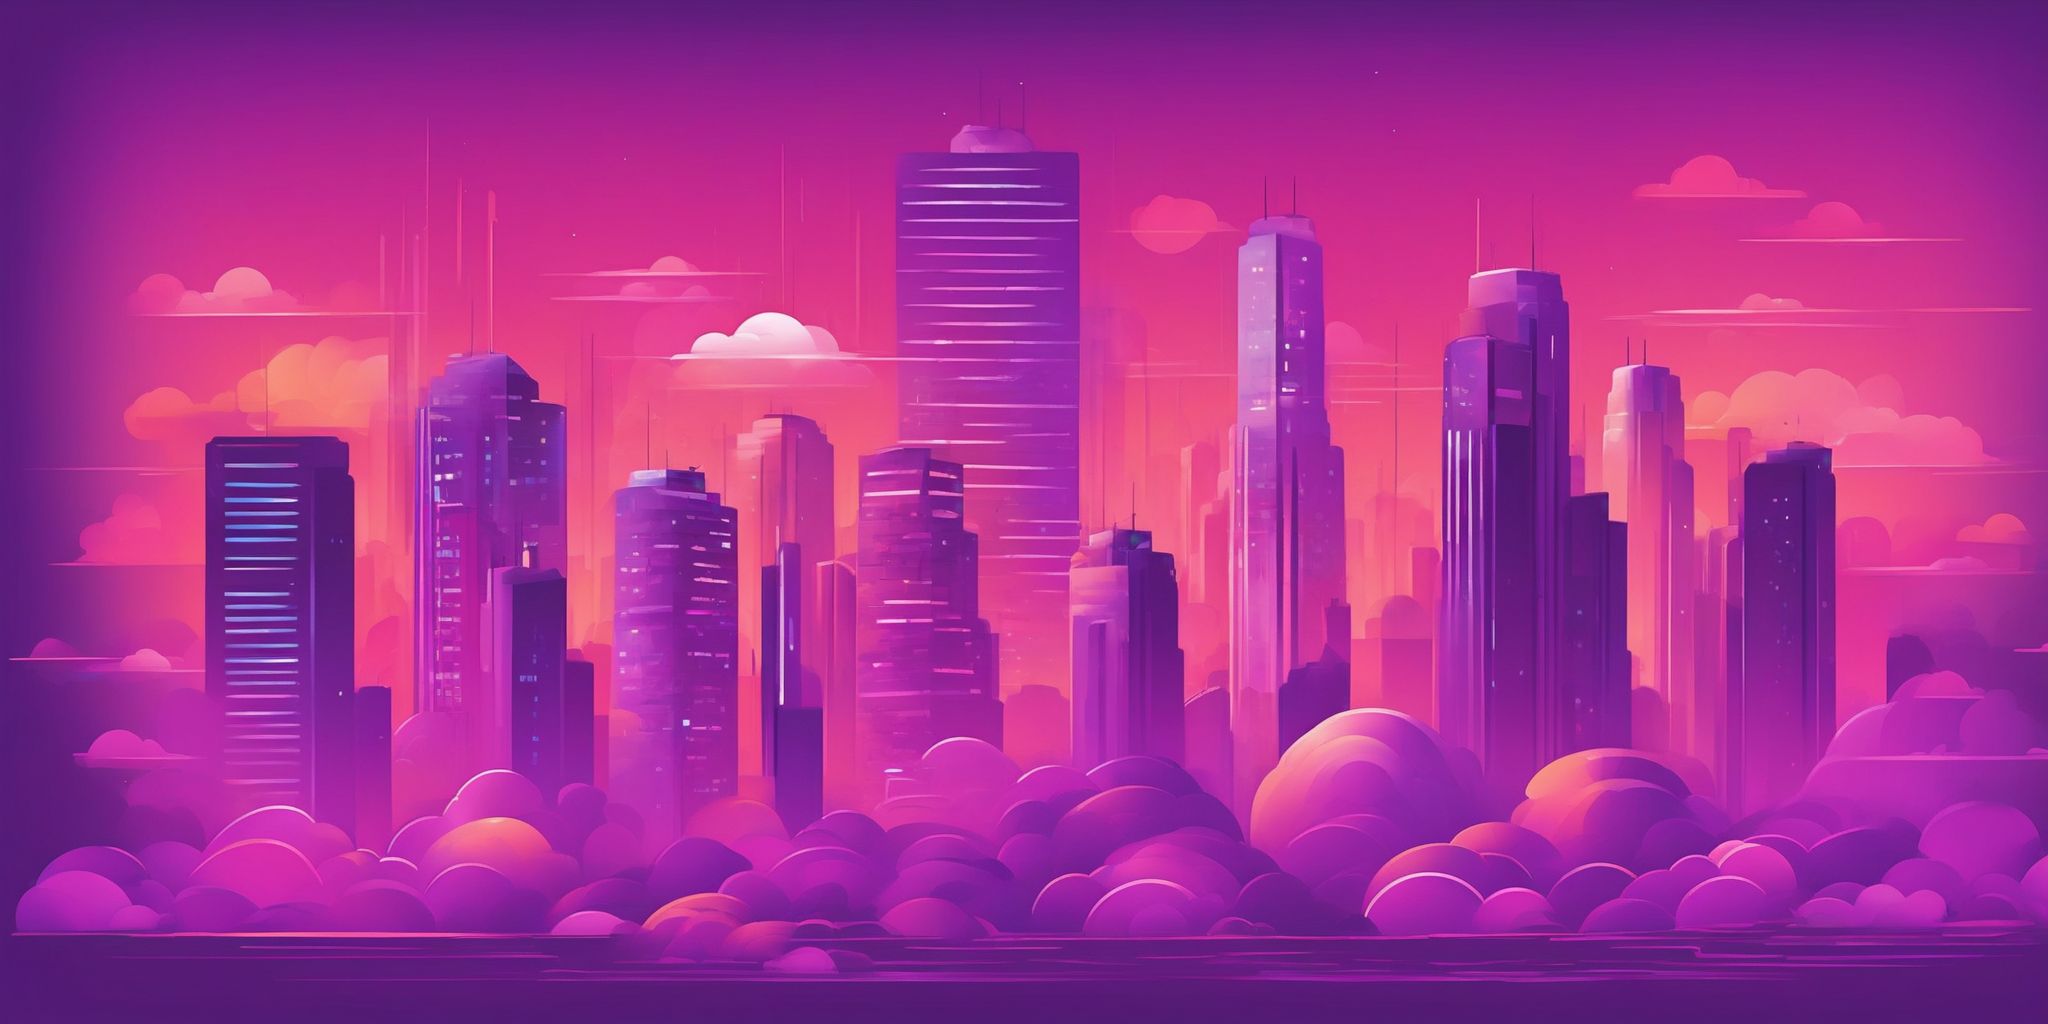 Manual in flat illustration style, colorful purple gradient colors